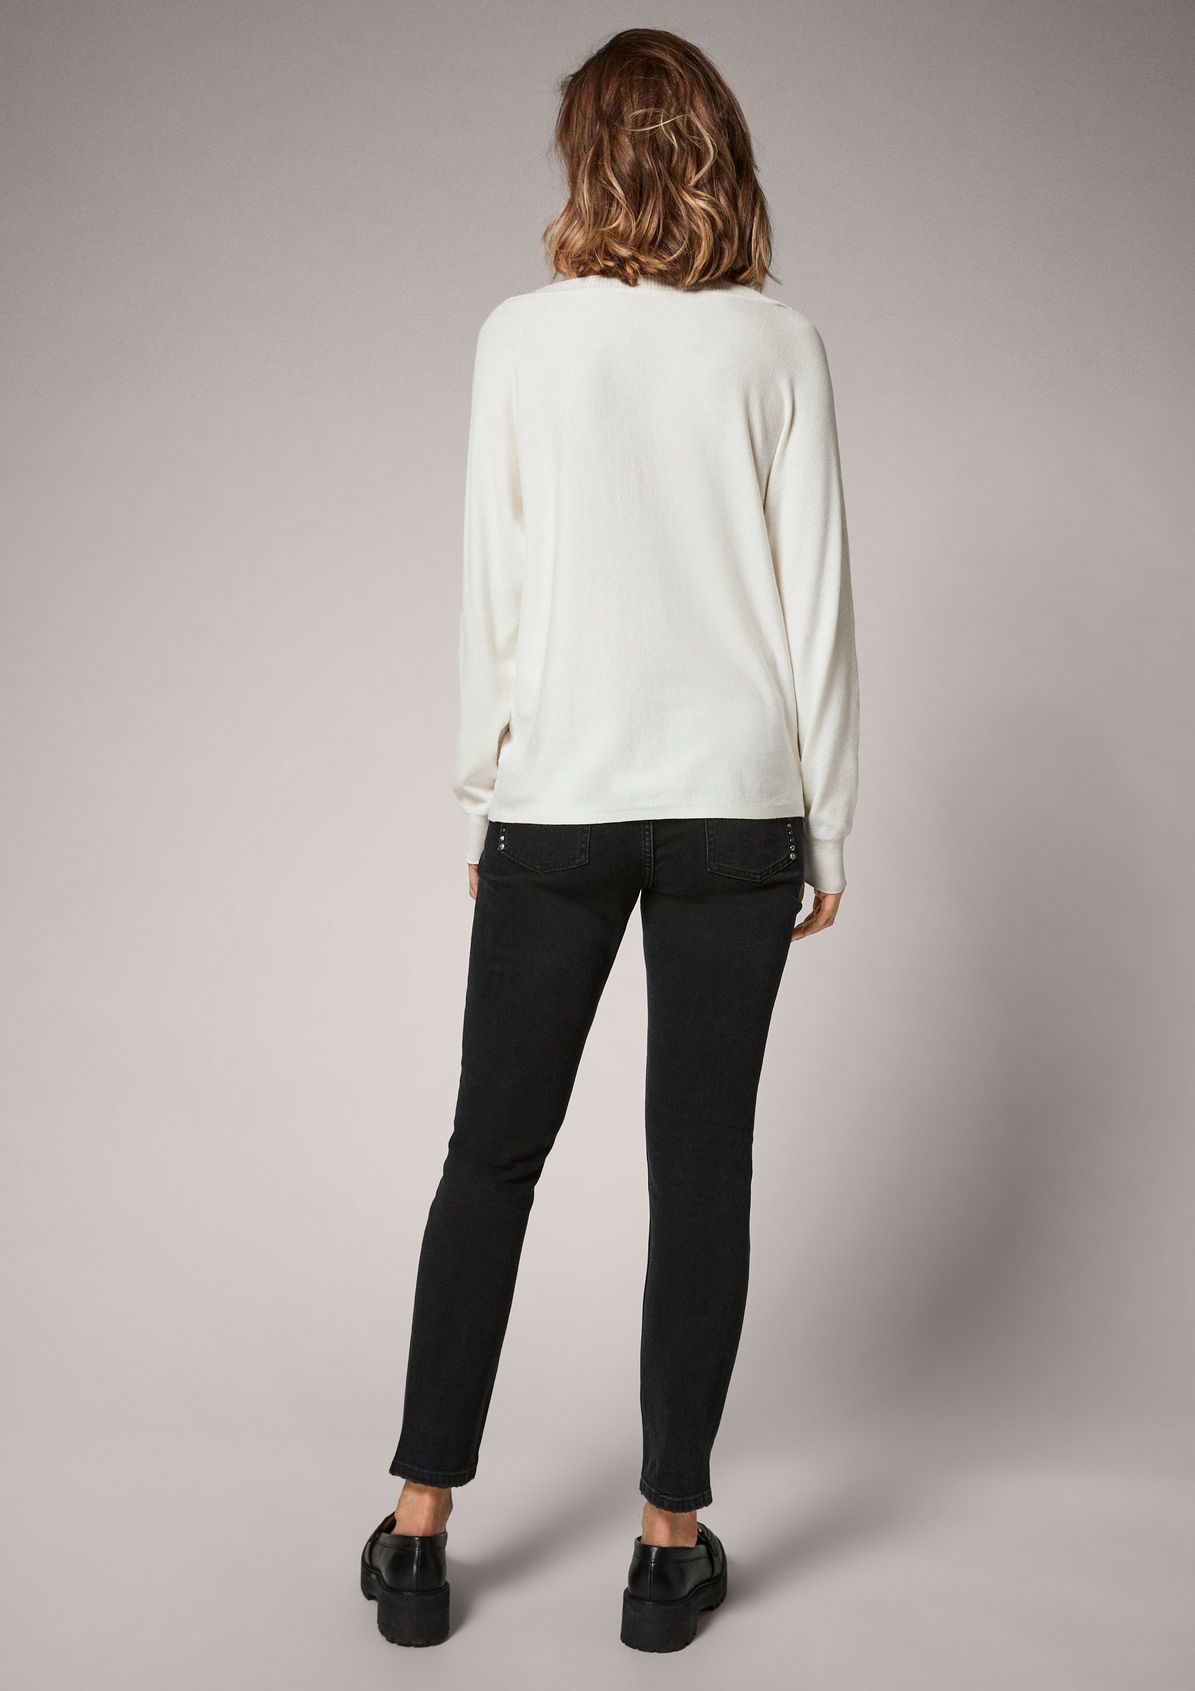 Jumper with a bateau neckline from comma